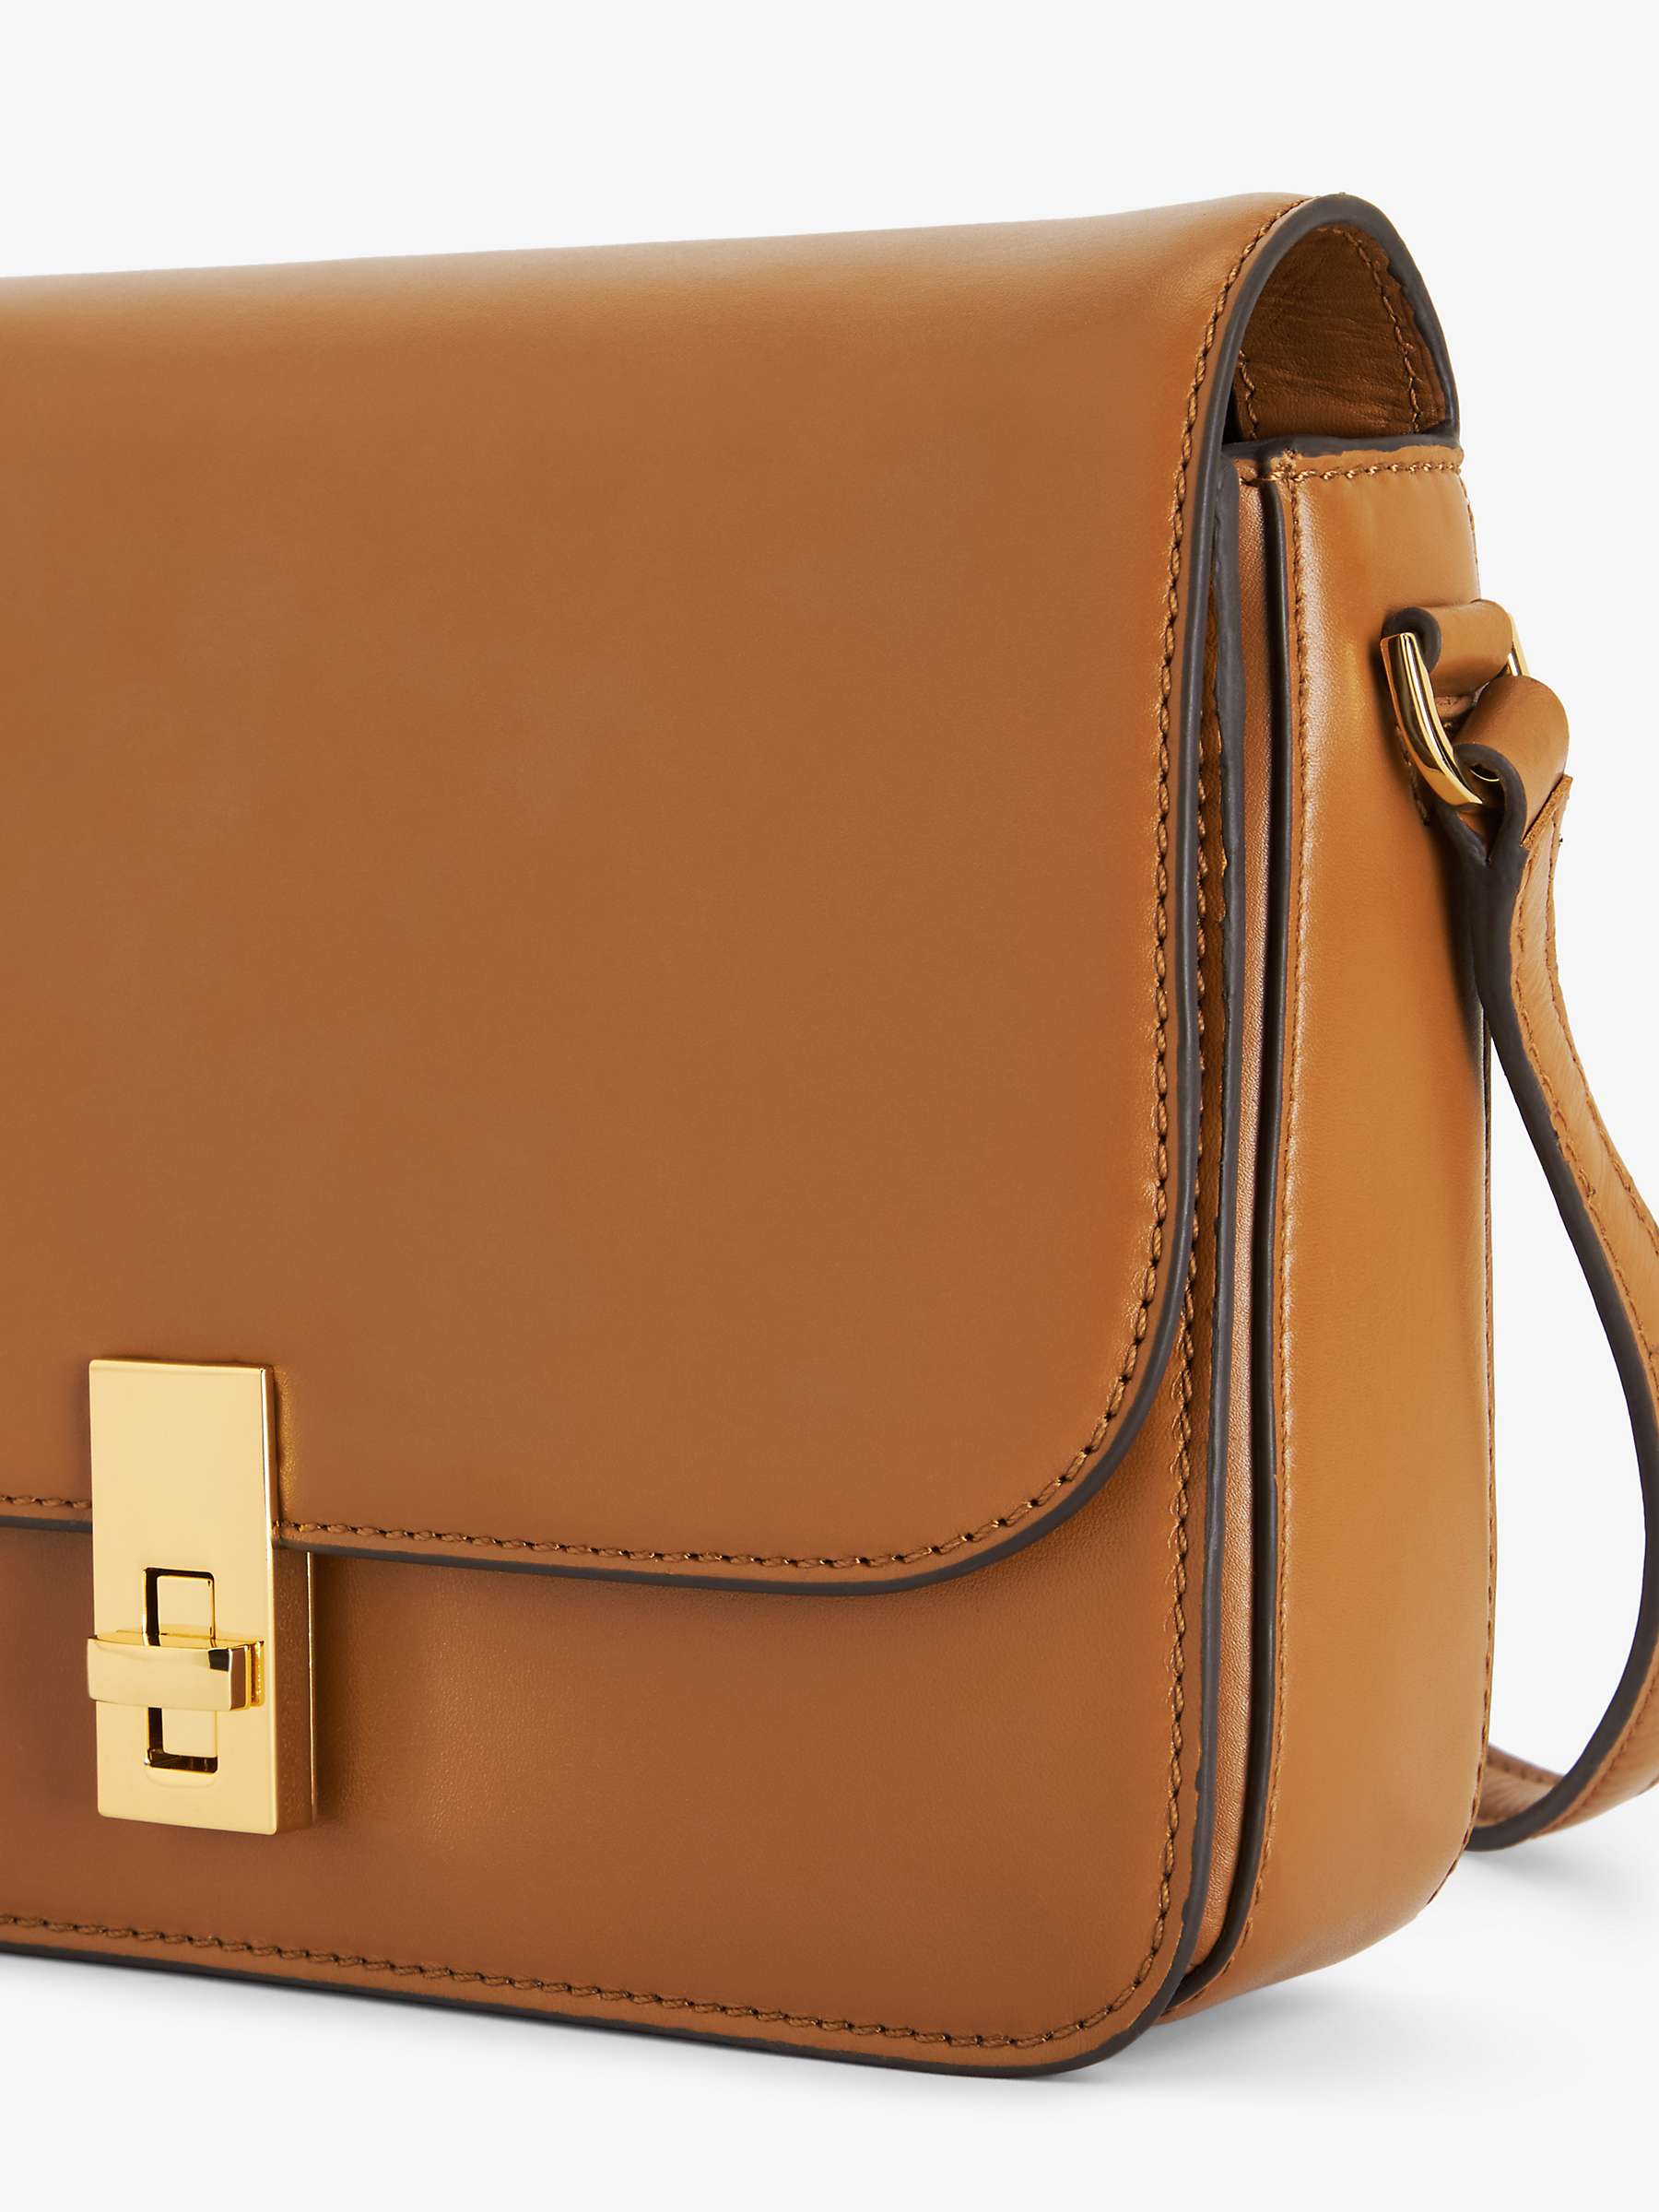 Buy John Lewis Smooth Leather Flapover Cross Body Bag Online at johnlewis.com